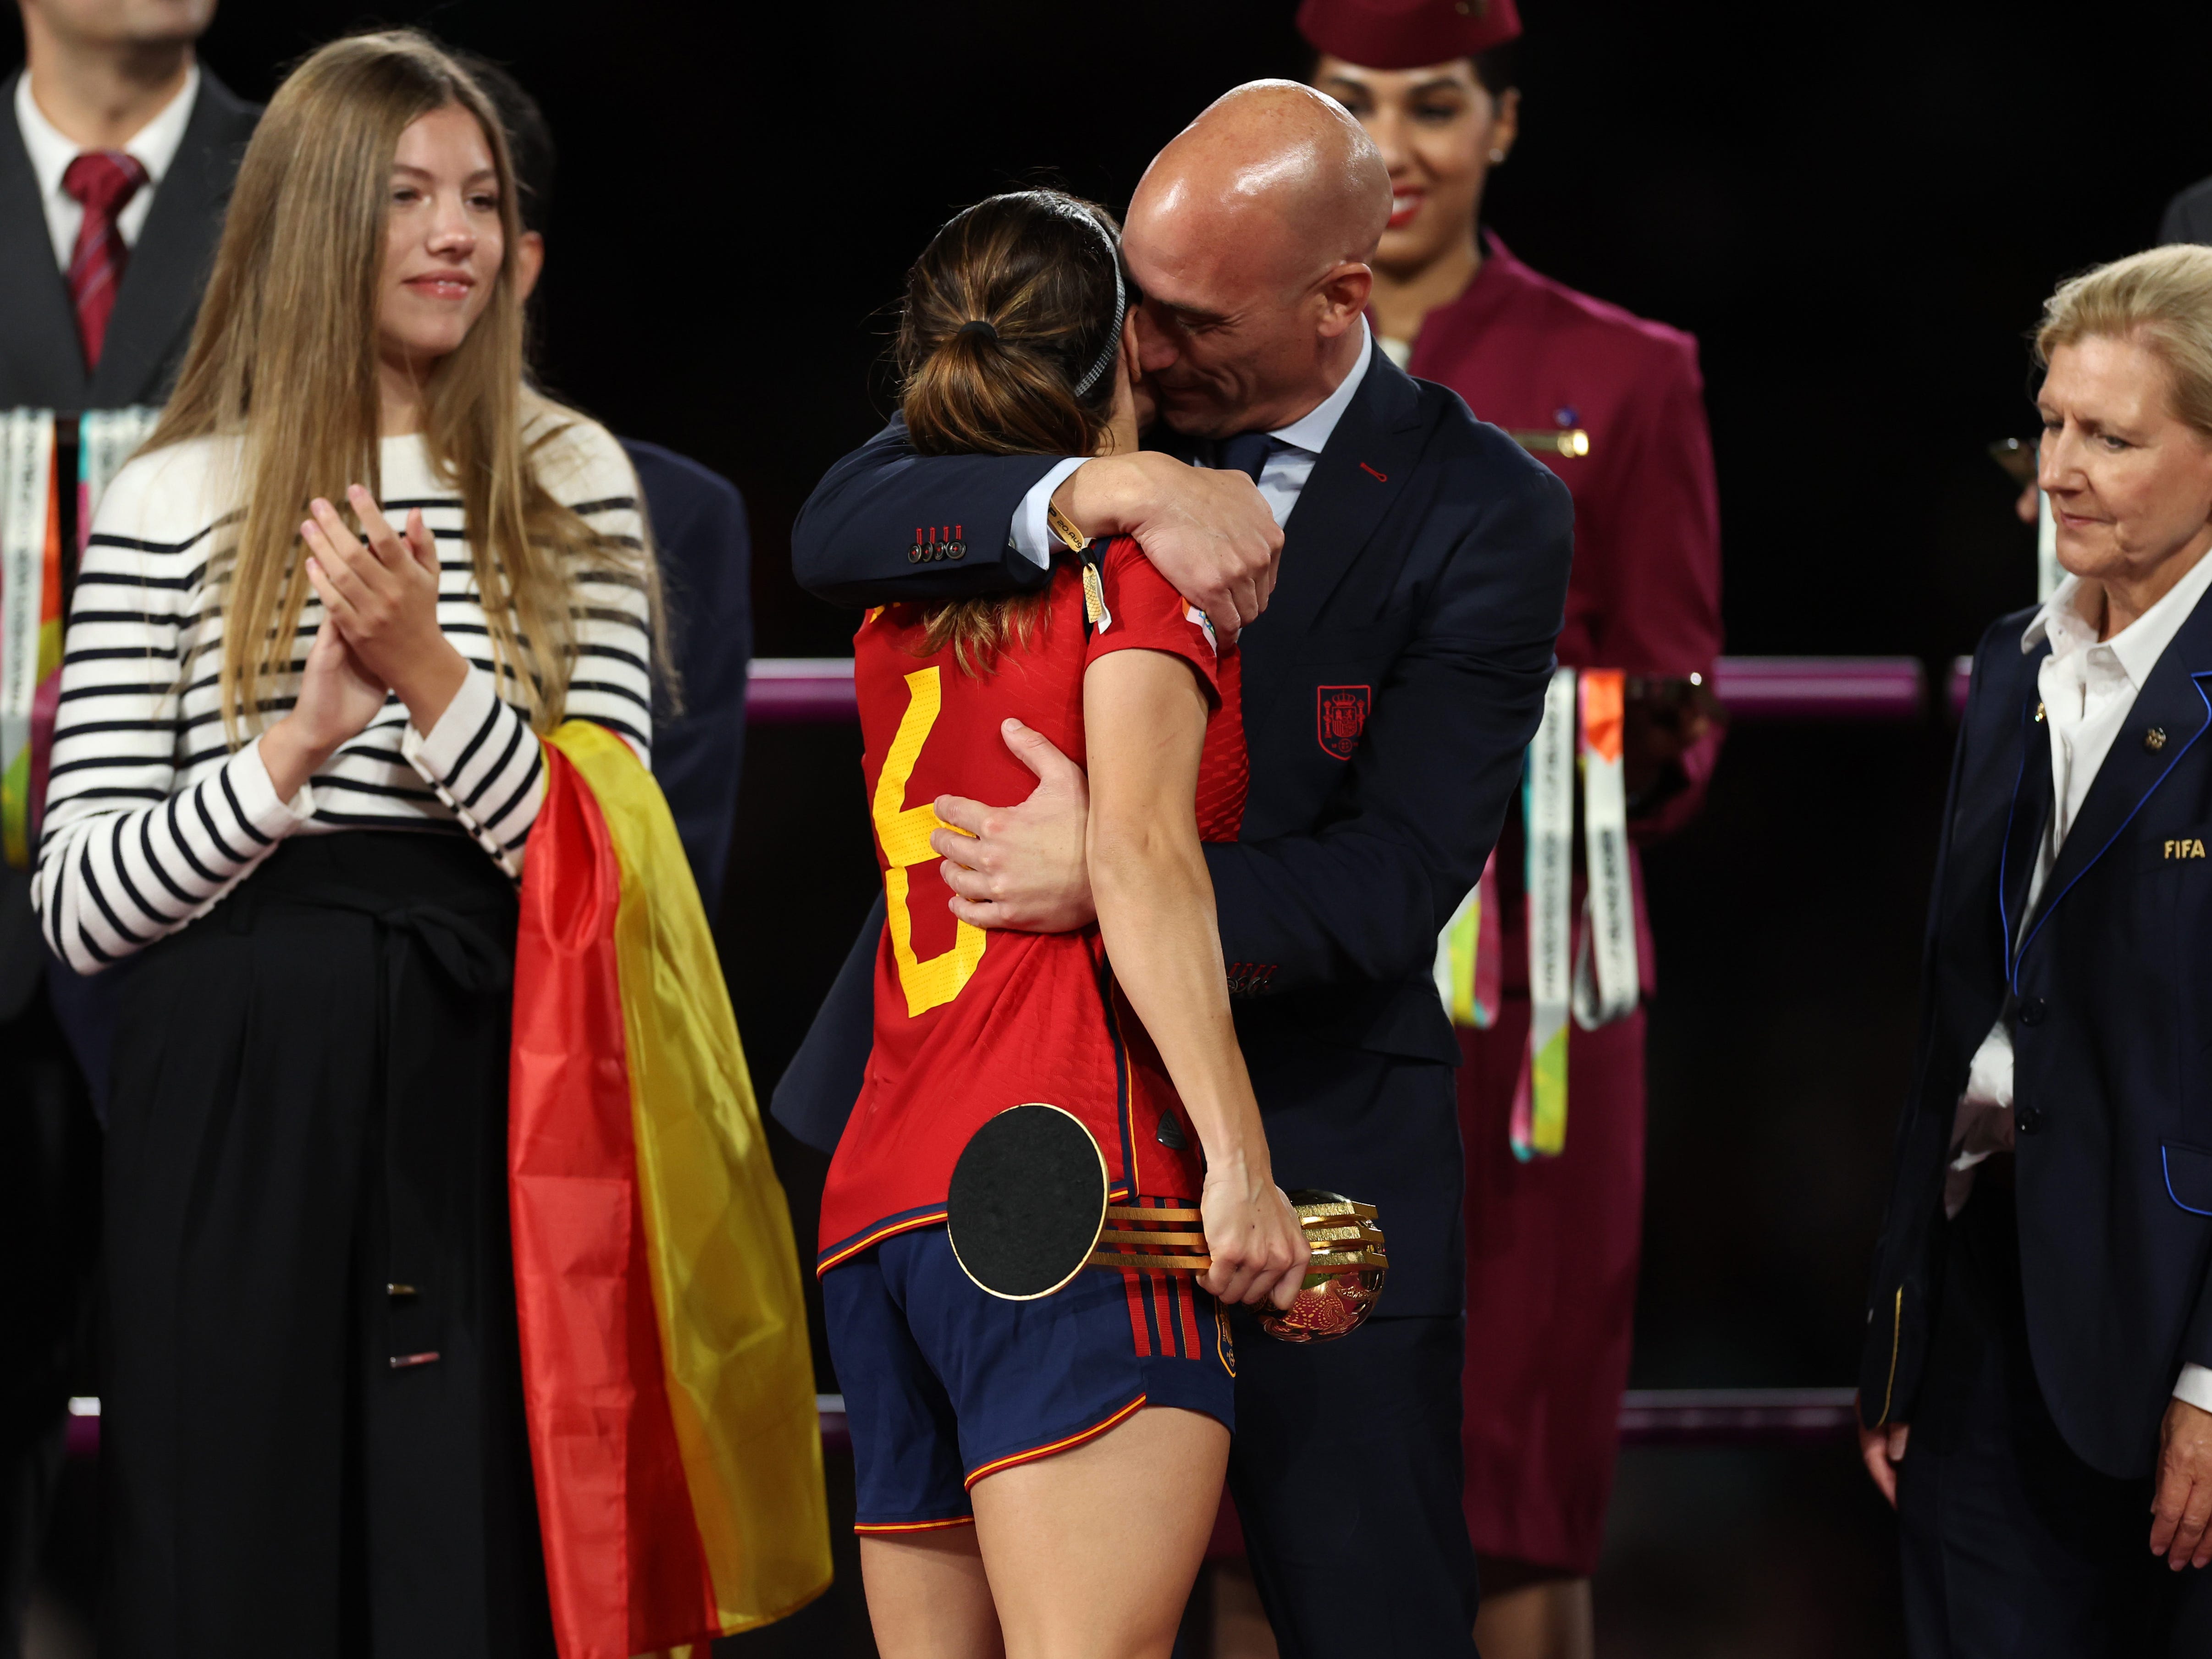 Luis Rubiales, President of the Royal Spanish Football Federation greets Golden Ball winner Aitana Bonmati after Sunday's final match between Spain and England in Sydney, Australia.